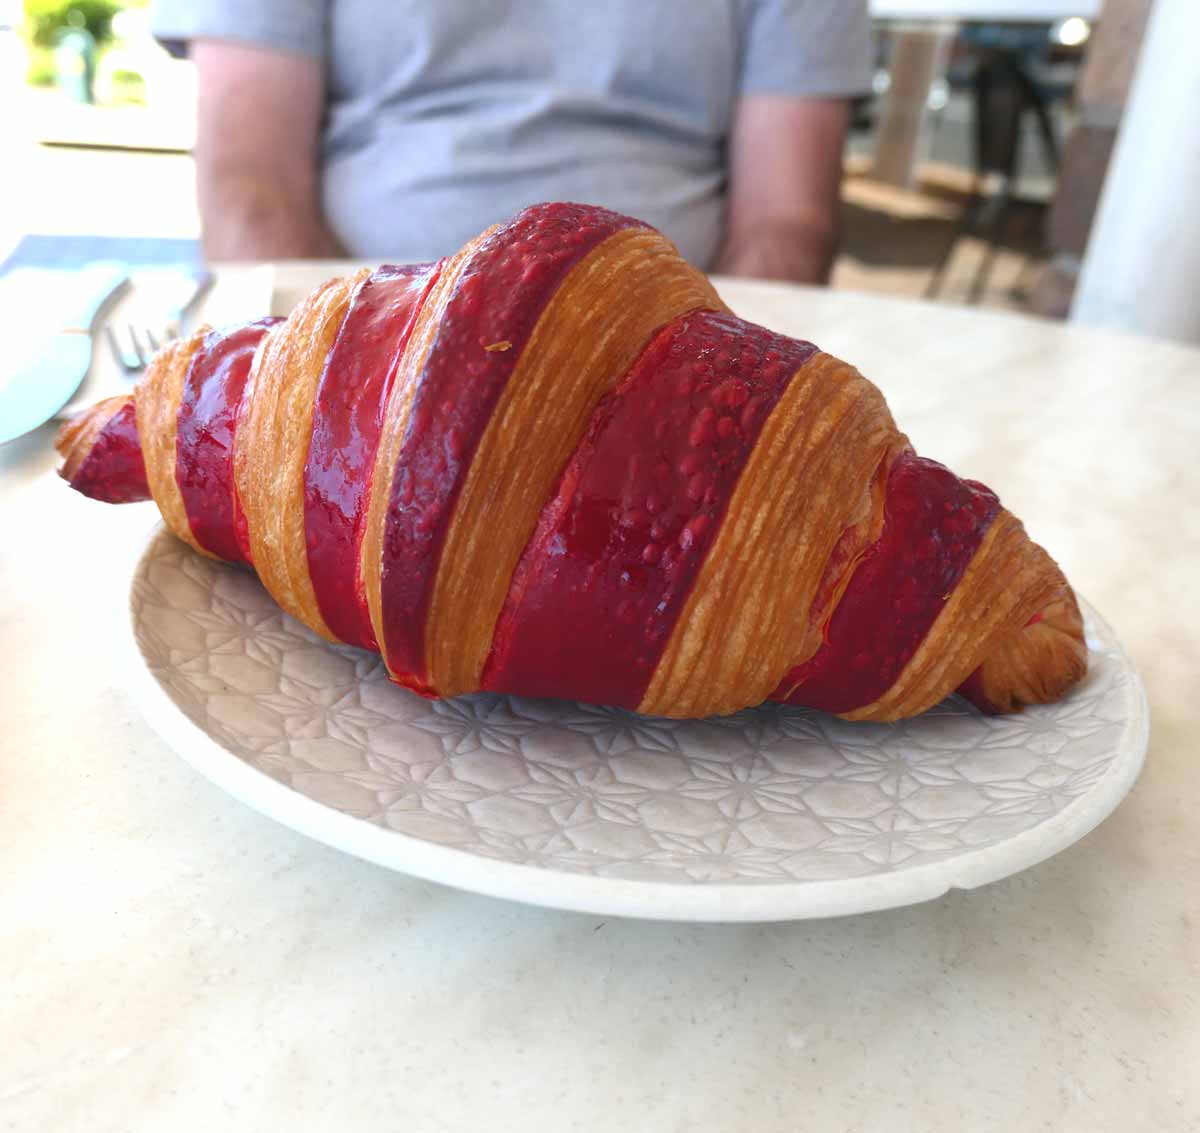 Raspberry croissant from L’Anse French Café & Croissanterie. Located in Port Lincoln, Eyre Peninsula, South Australia.